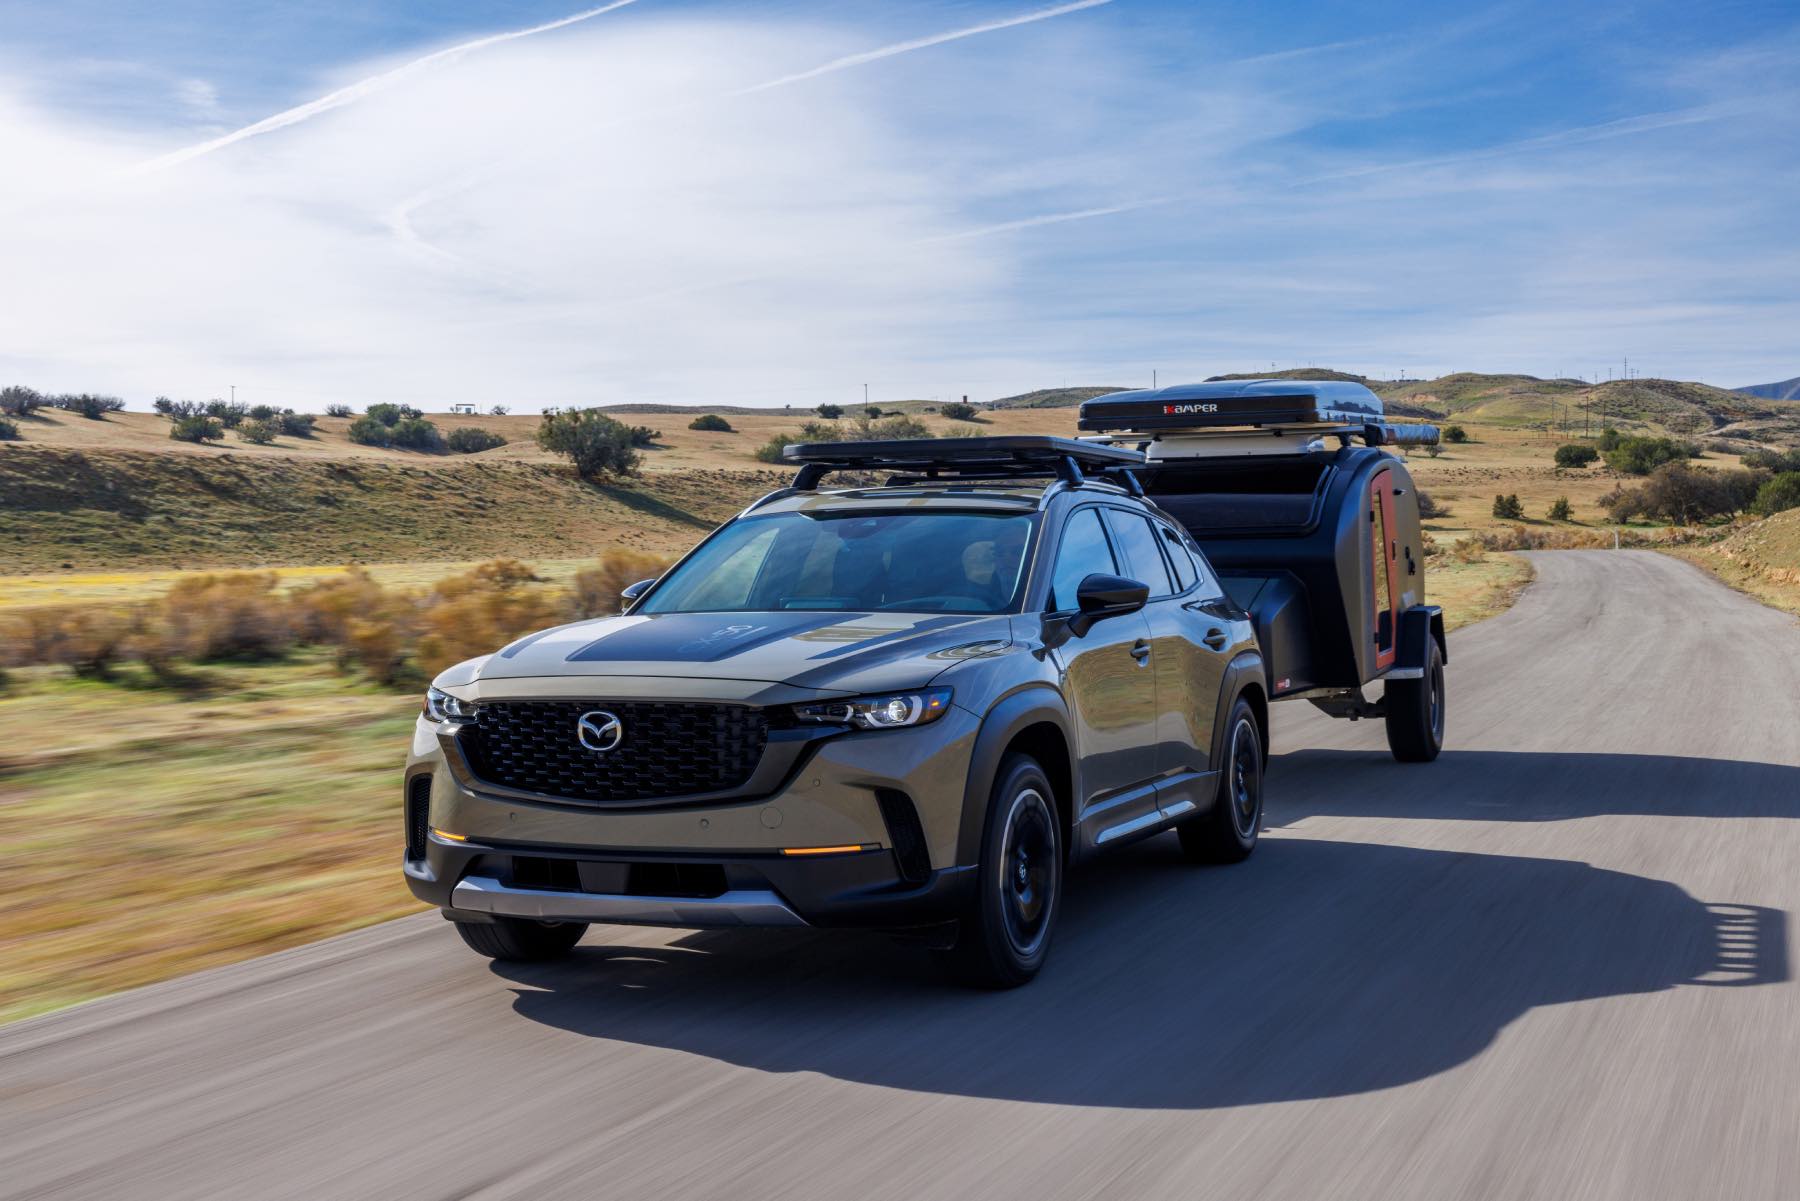 The 2023 Mazda CX-50 Meridian Edition tows a small camper trailer.